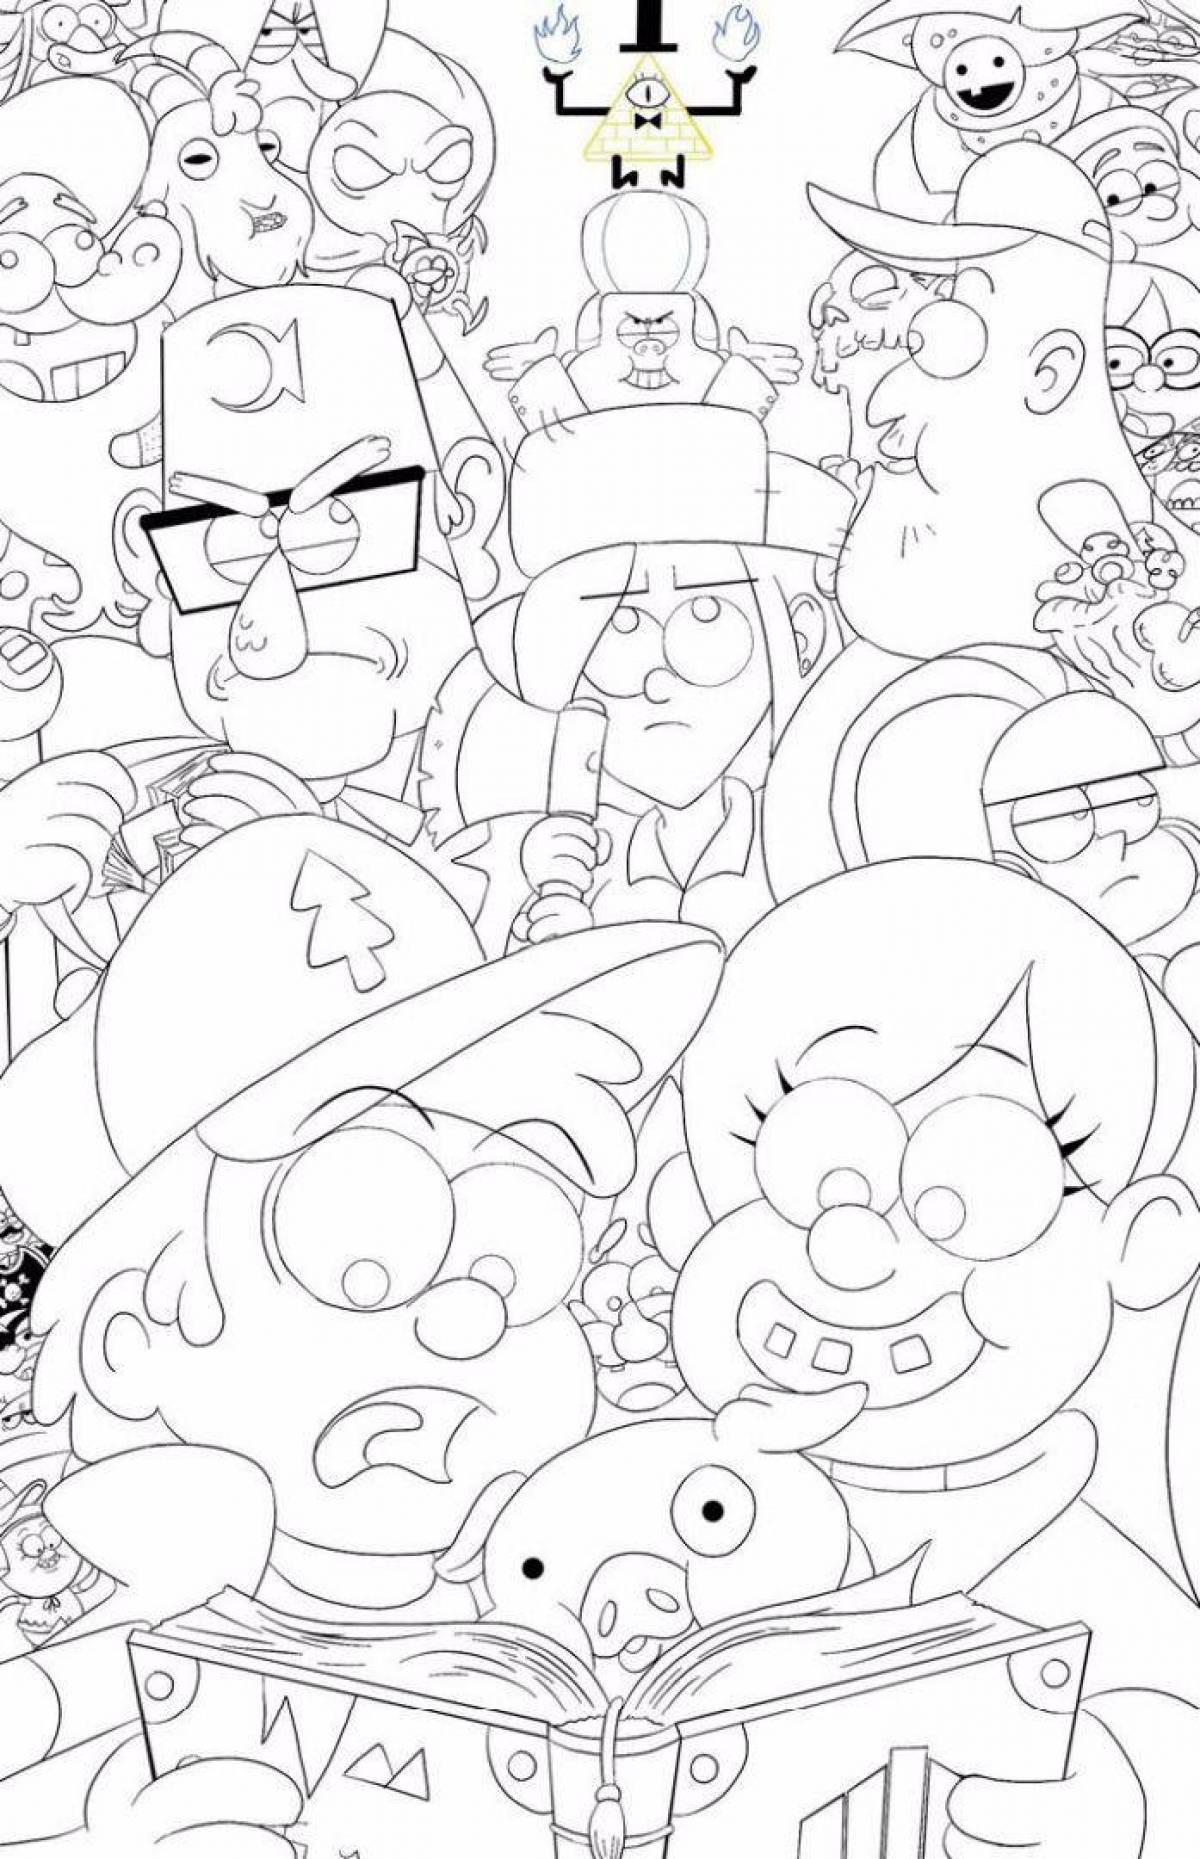 Cute gravity falls coloring page